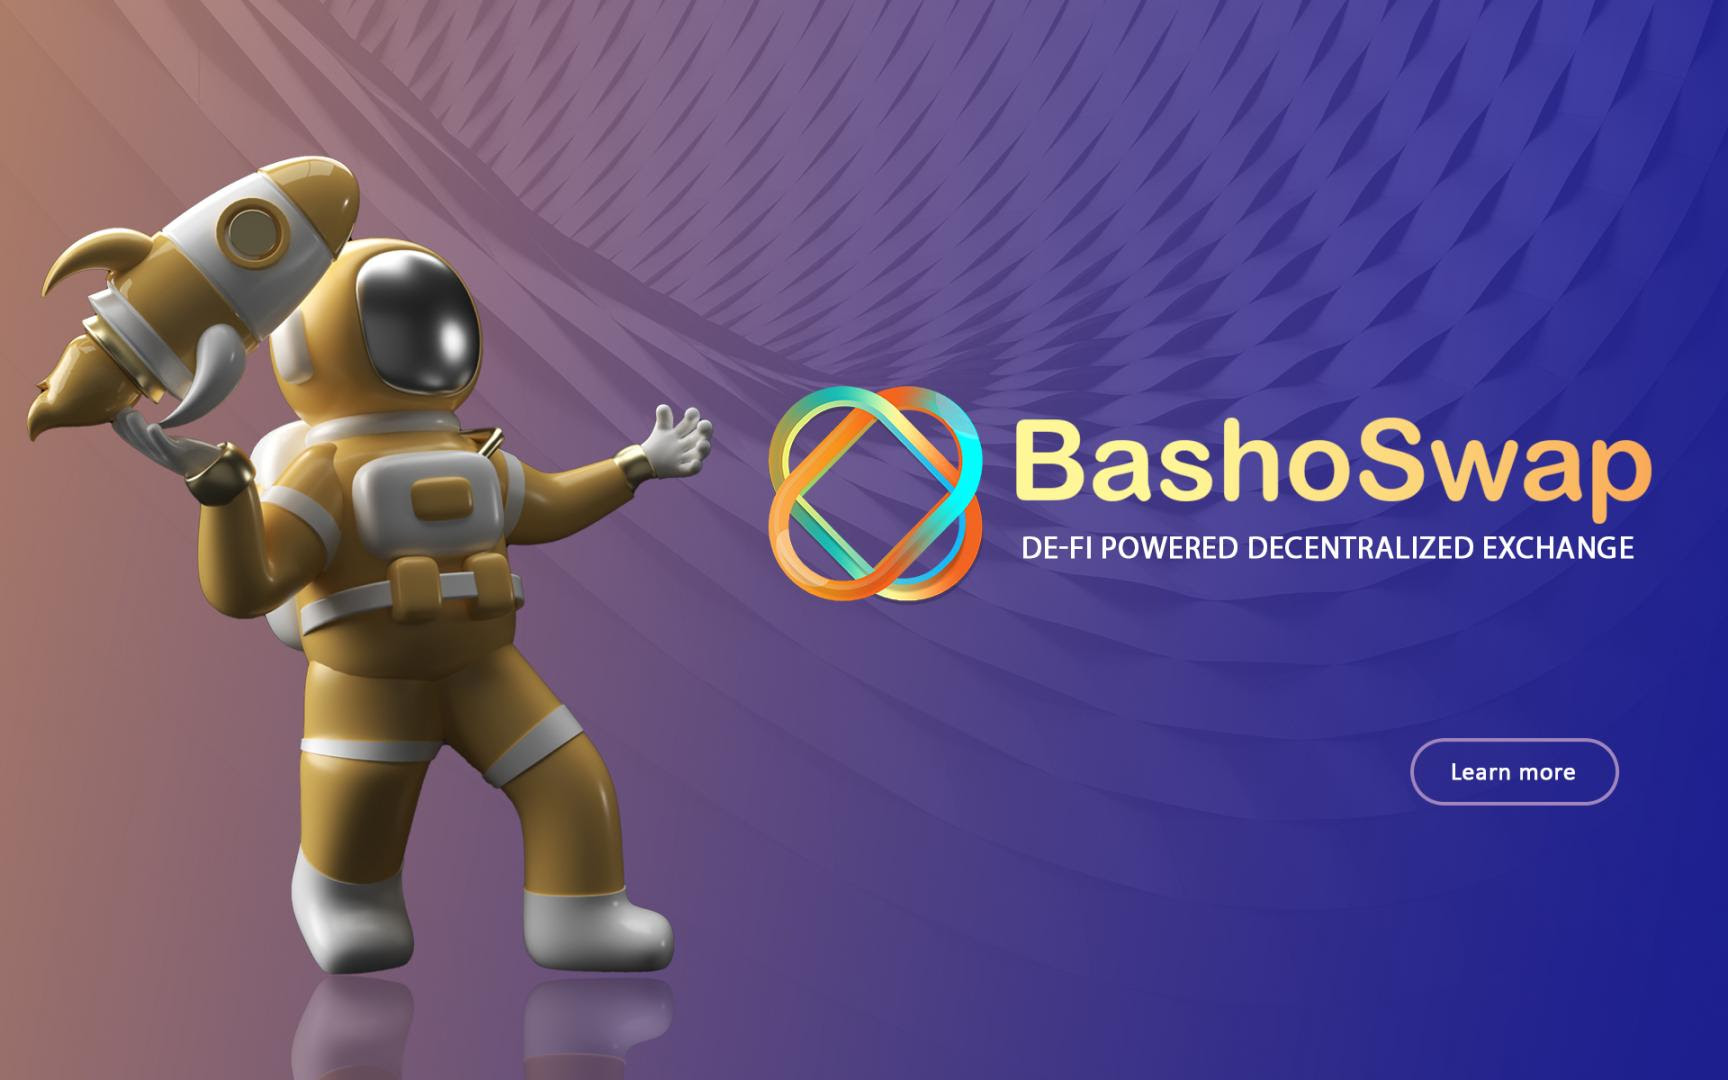 Bashoswap Readies For Second AMA Ahead Of Initial $BASH Token Sale Round